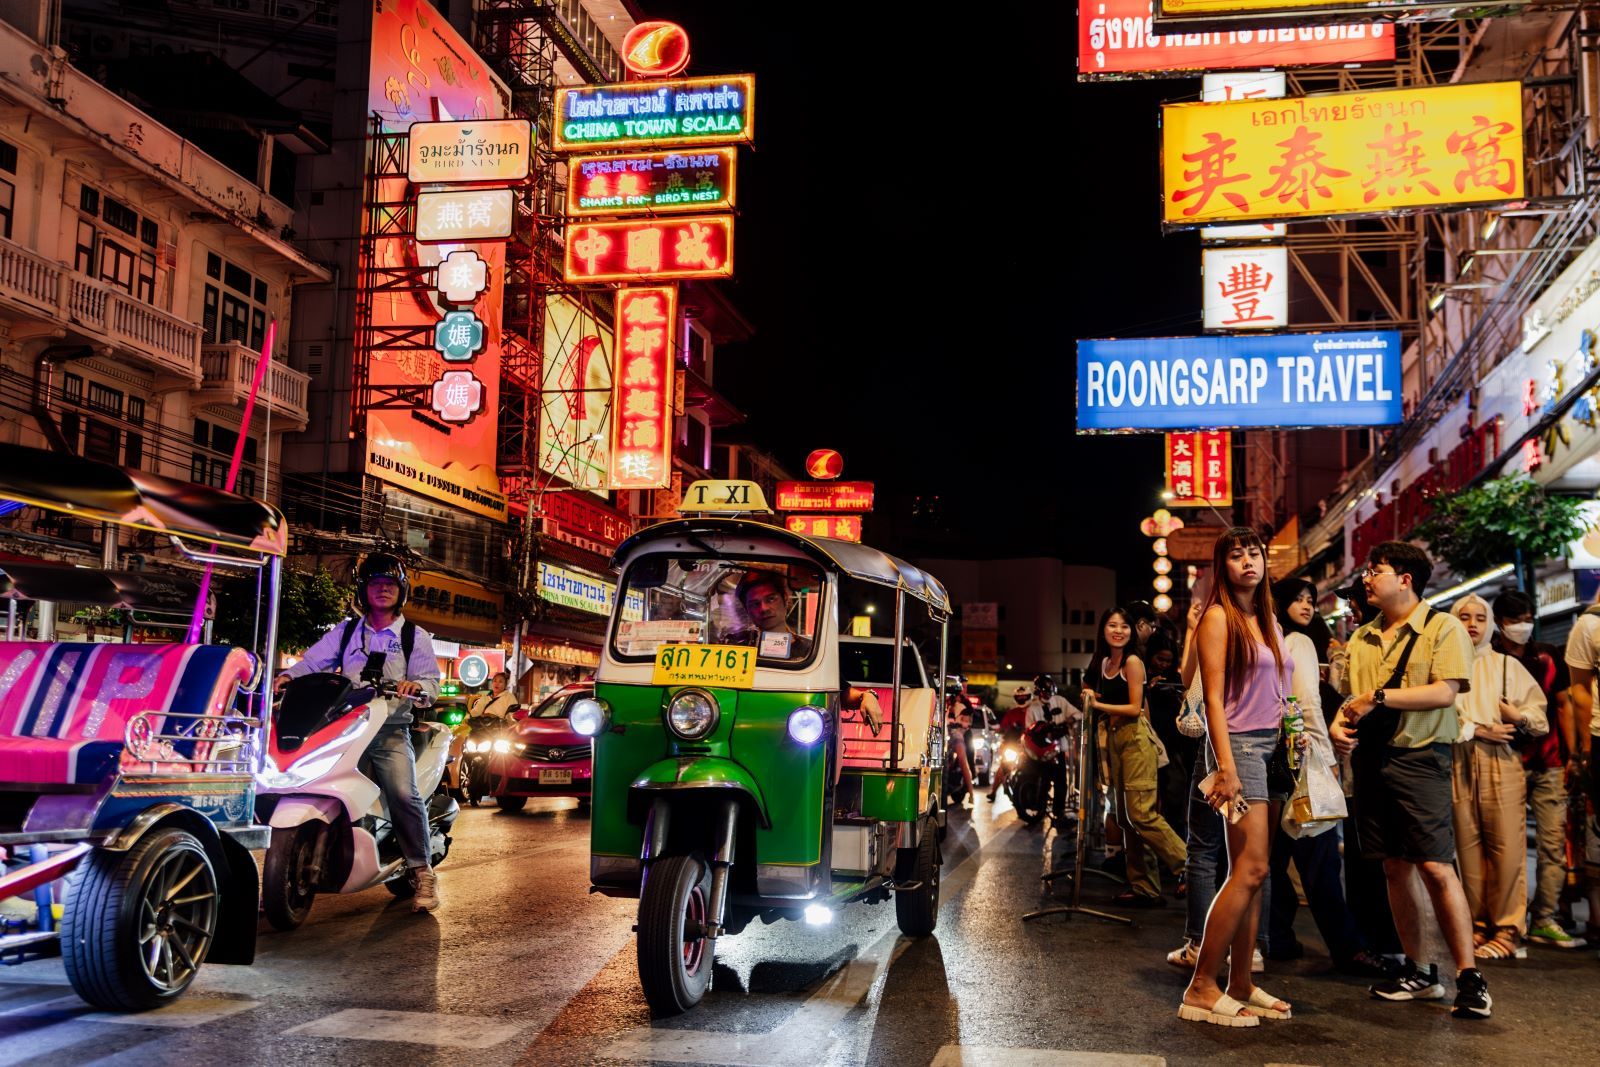 Image Credit: Shutterstock / Damian Lugowski <p>Beaches and nightlife draw many Brits, but their behaviour often clashes with Thailand’s more conservative norms. Incidents of disrespectful behaviour at sacred sites and environmental damage have caused tensions.</p>